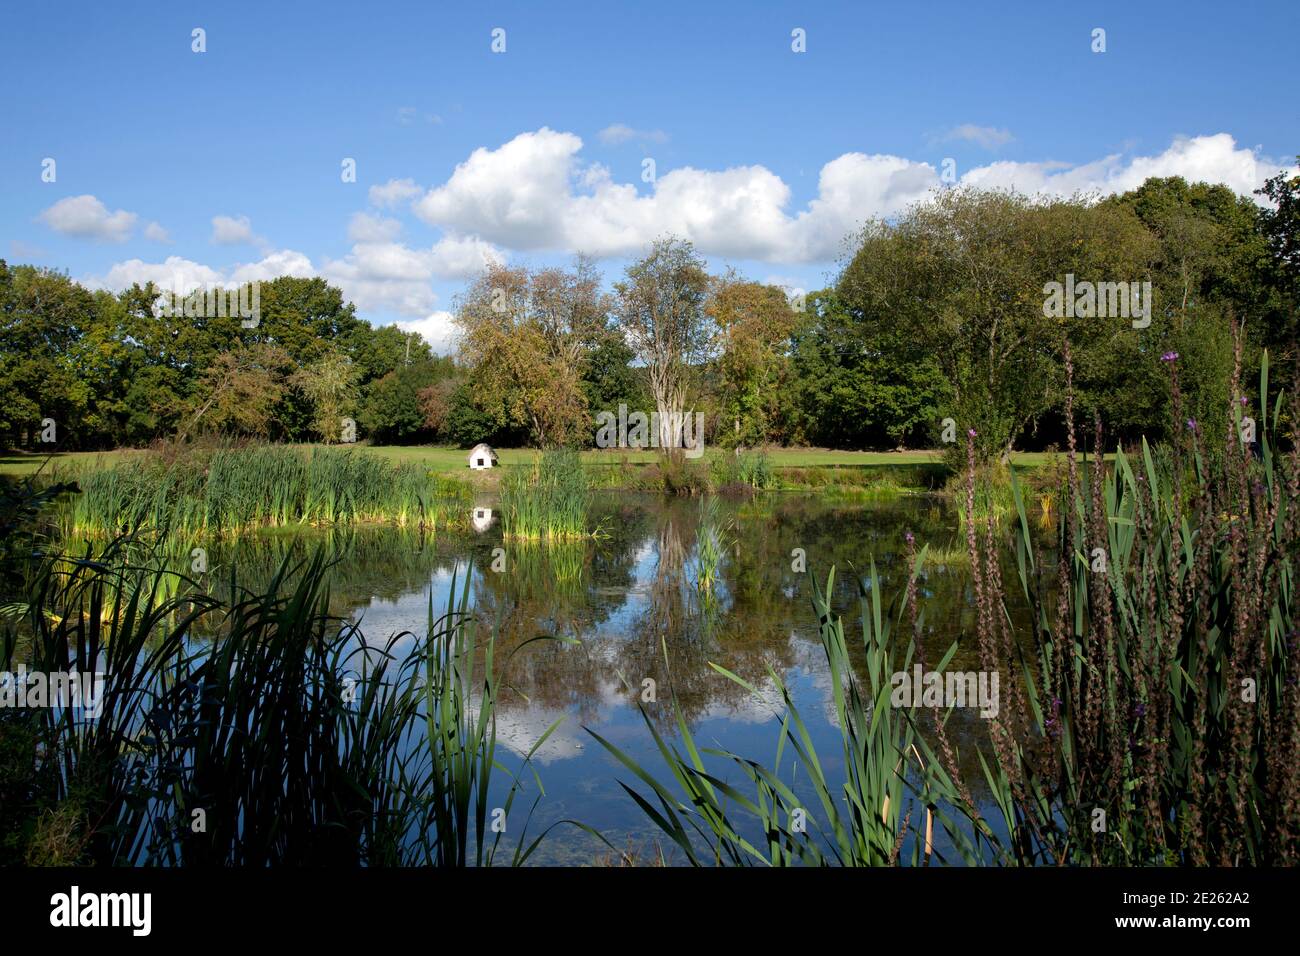 Large garden pond or lake with duck house and sky reflection Stock Photo